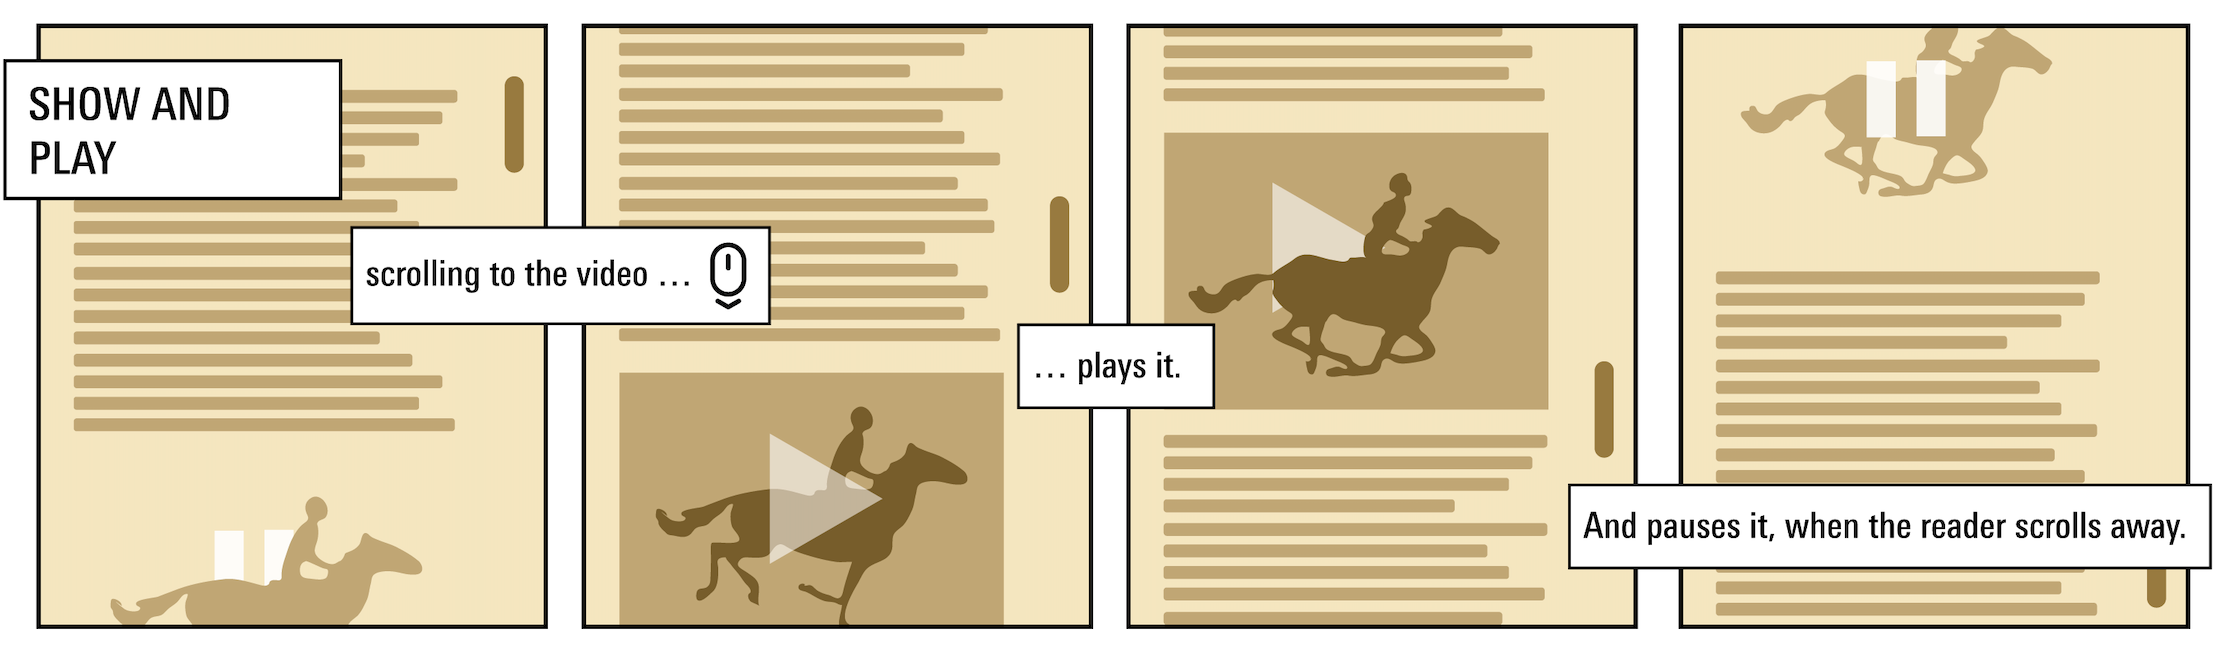 A four panel illustration of how show and play scrollytelling work, with the text 'Scrolling the video... plays it. And pauses it, when the reader scrolls away